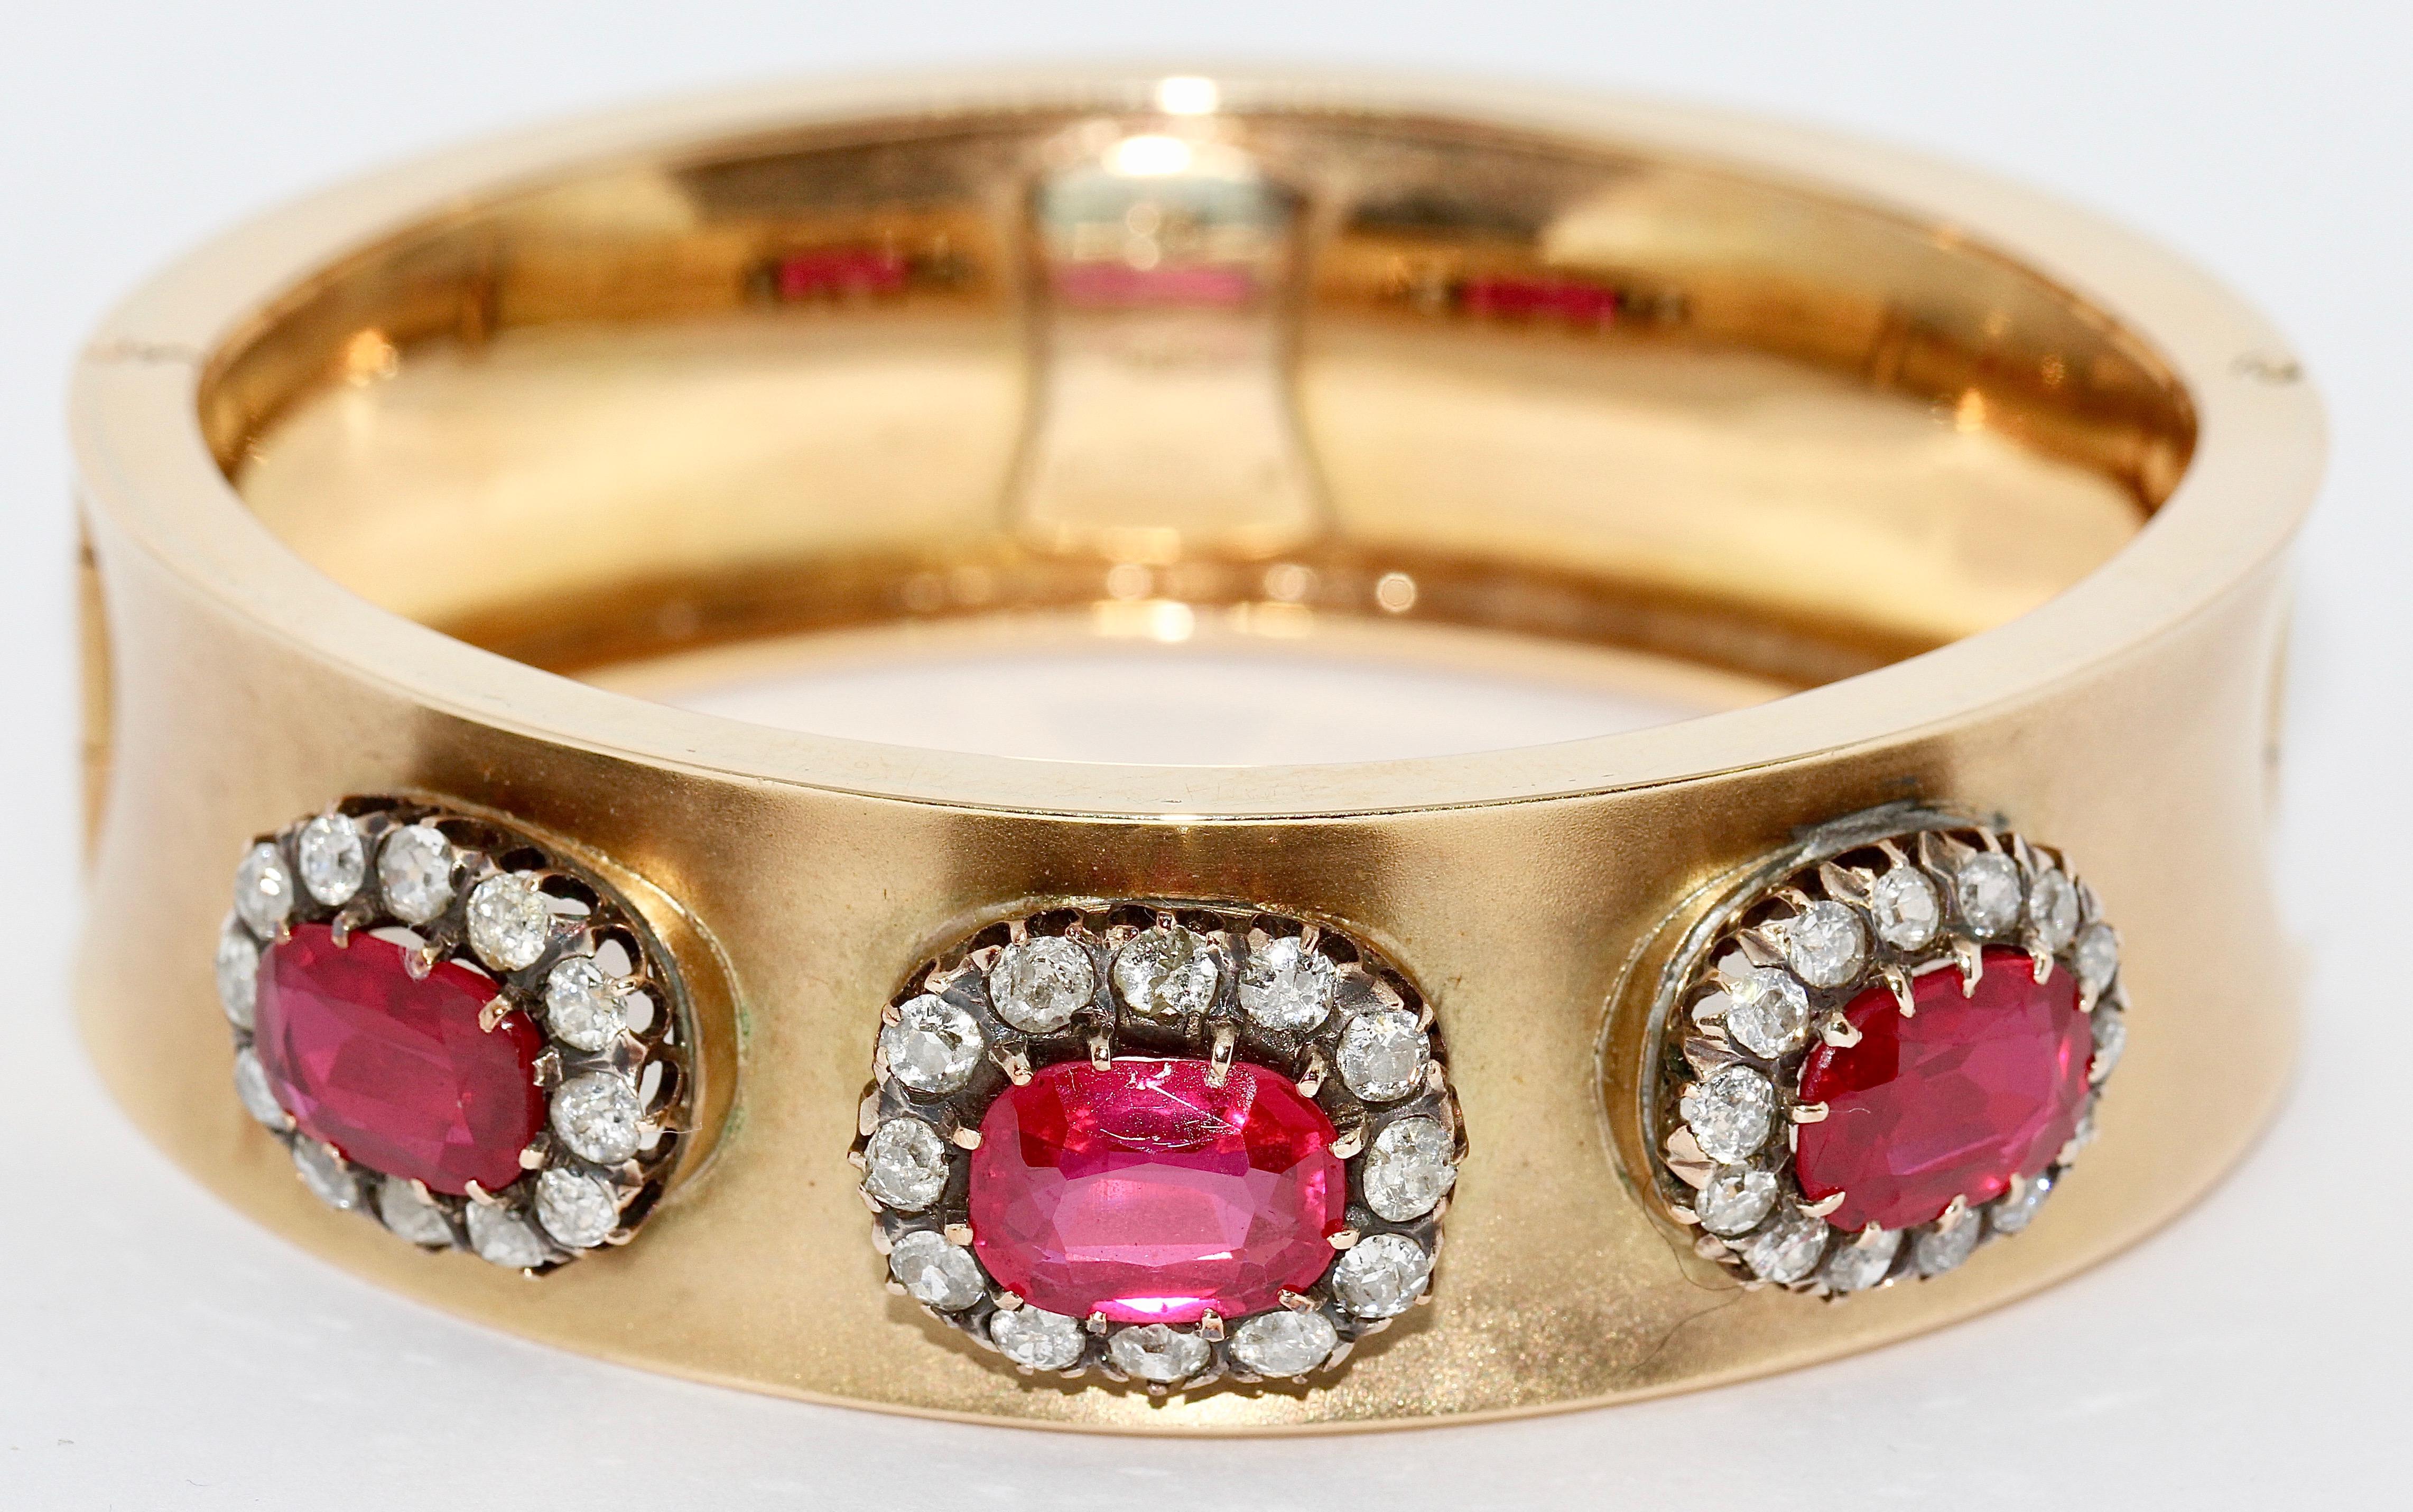 Antique Ladies bangle with big Rubies and Diamonds. 14 Karat Gold.

Magnificent ladies bracelet, set with three large rubies and many small diamonds.

Hallmarked with 585 and 